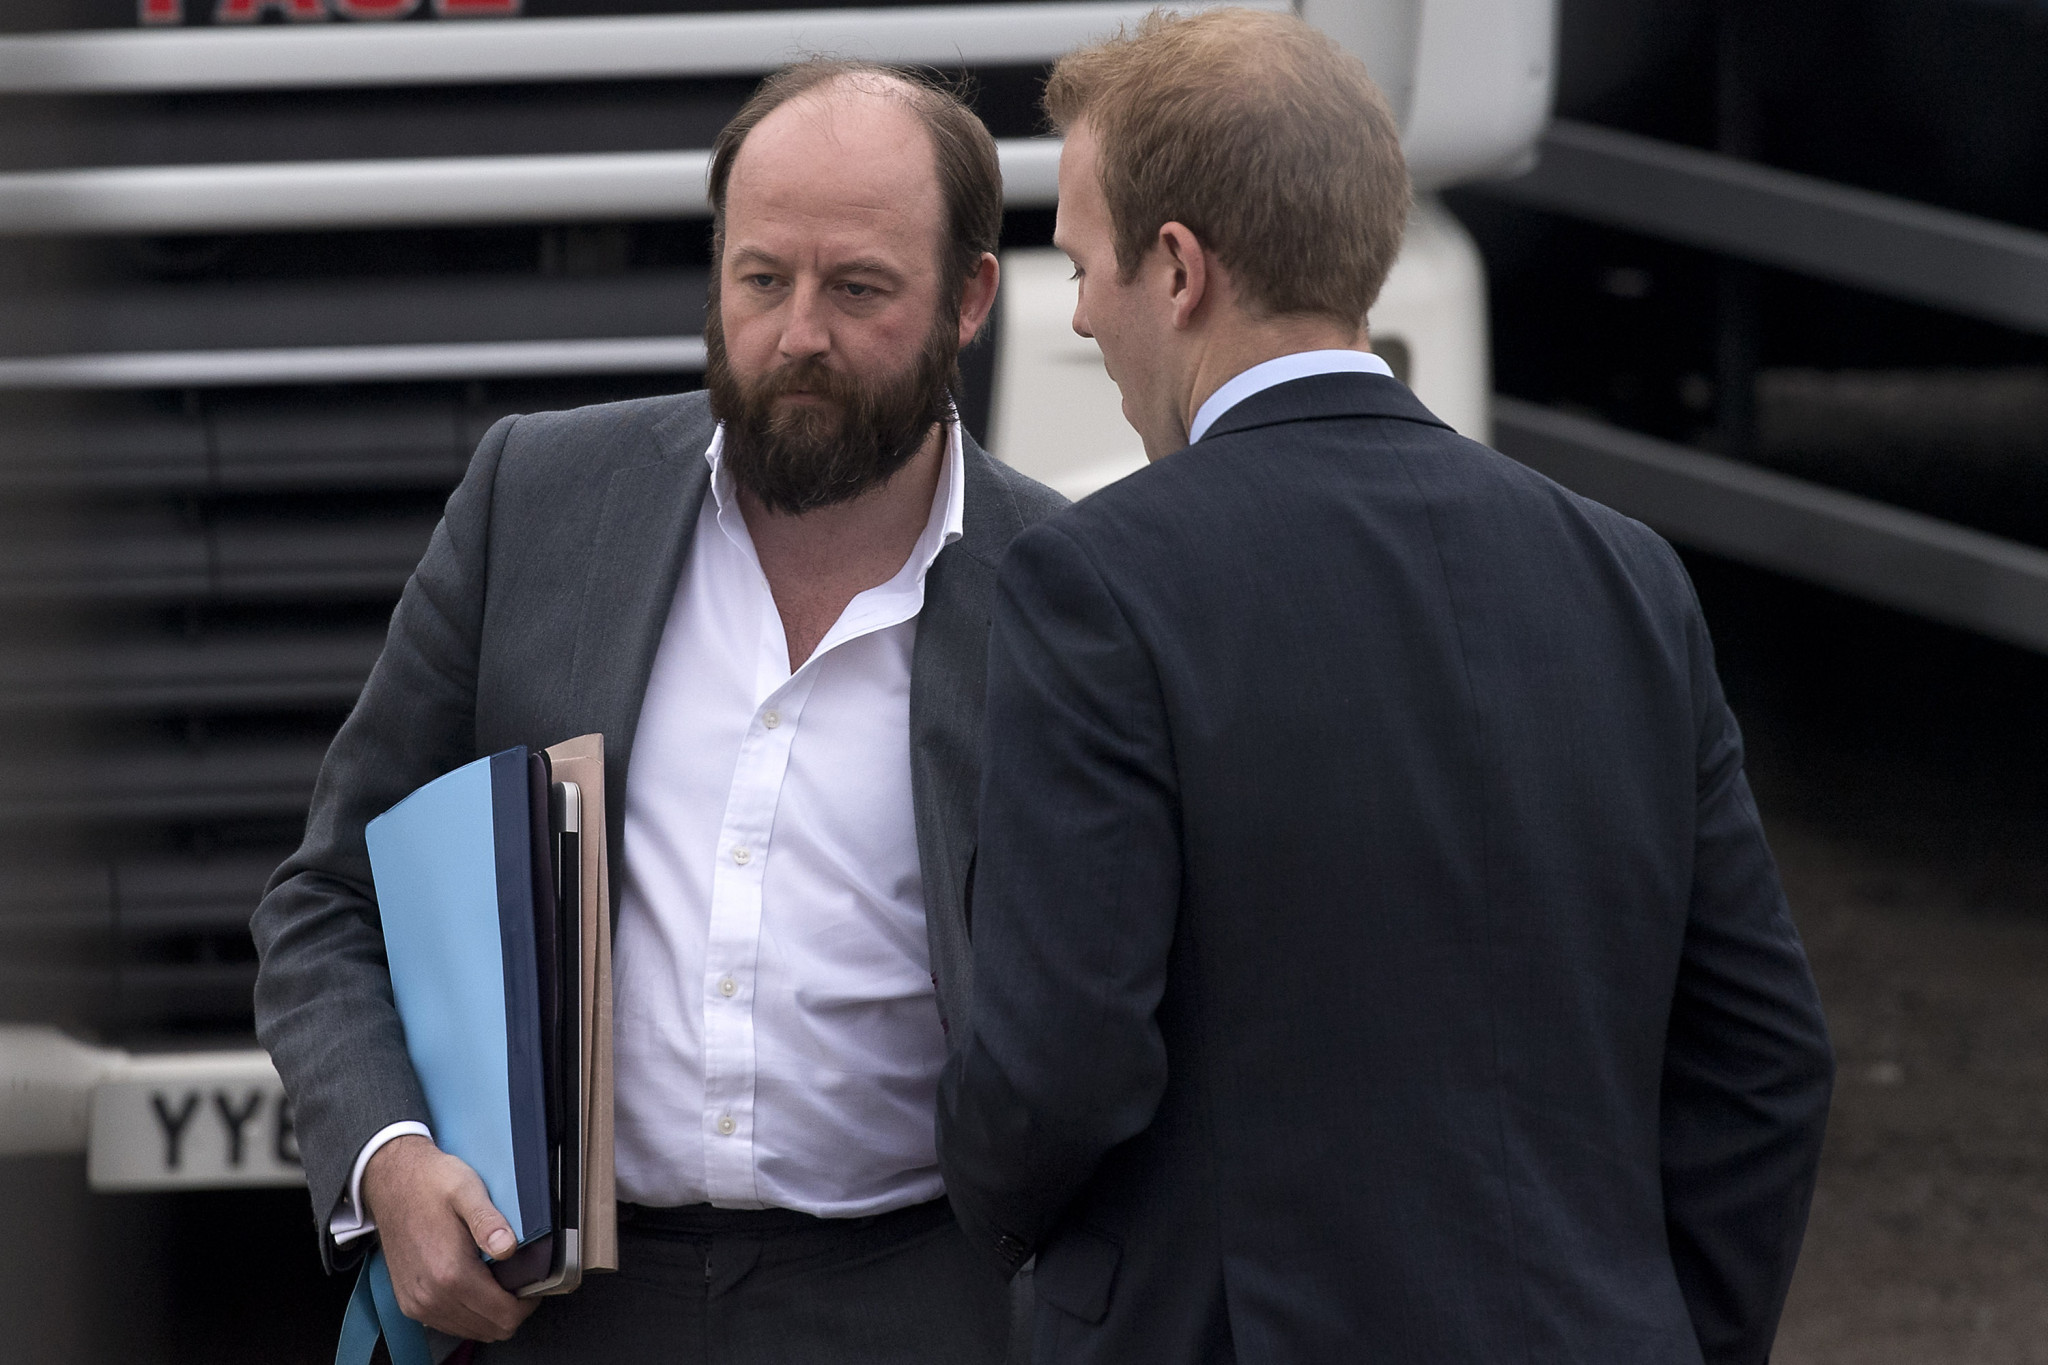 The appointment of Nick Timothy as a non-executive director of the Birmingham 2022 Board has caused criticism ©Getty Images